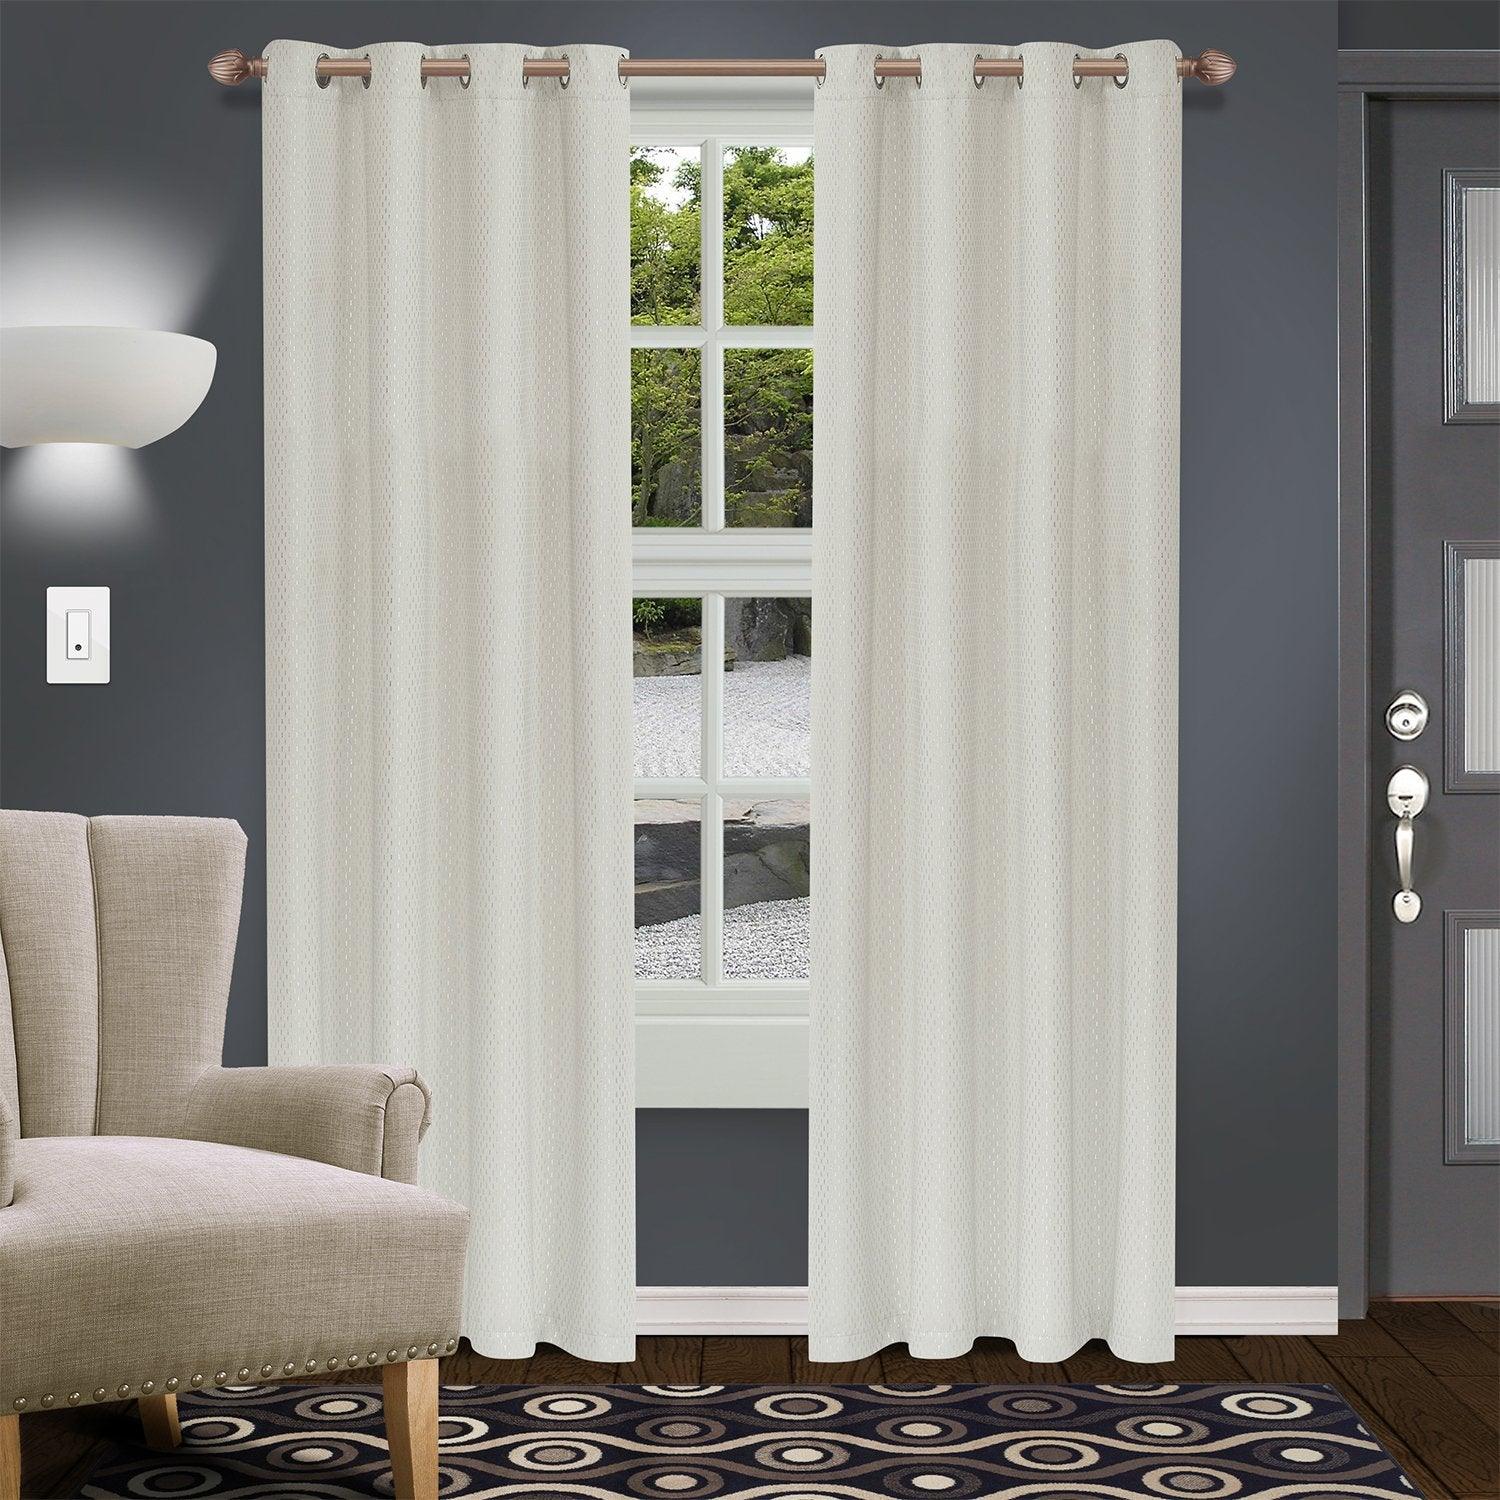 All About Curtains: Fabrics, Designs, & More! - Home City Inc